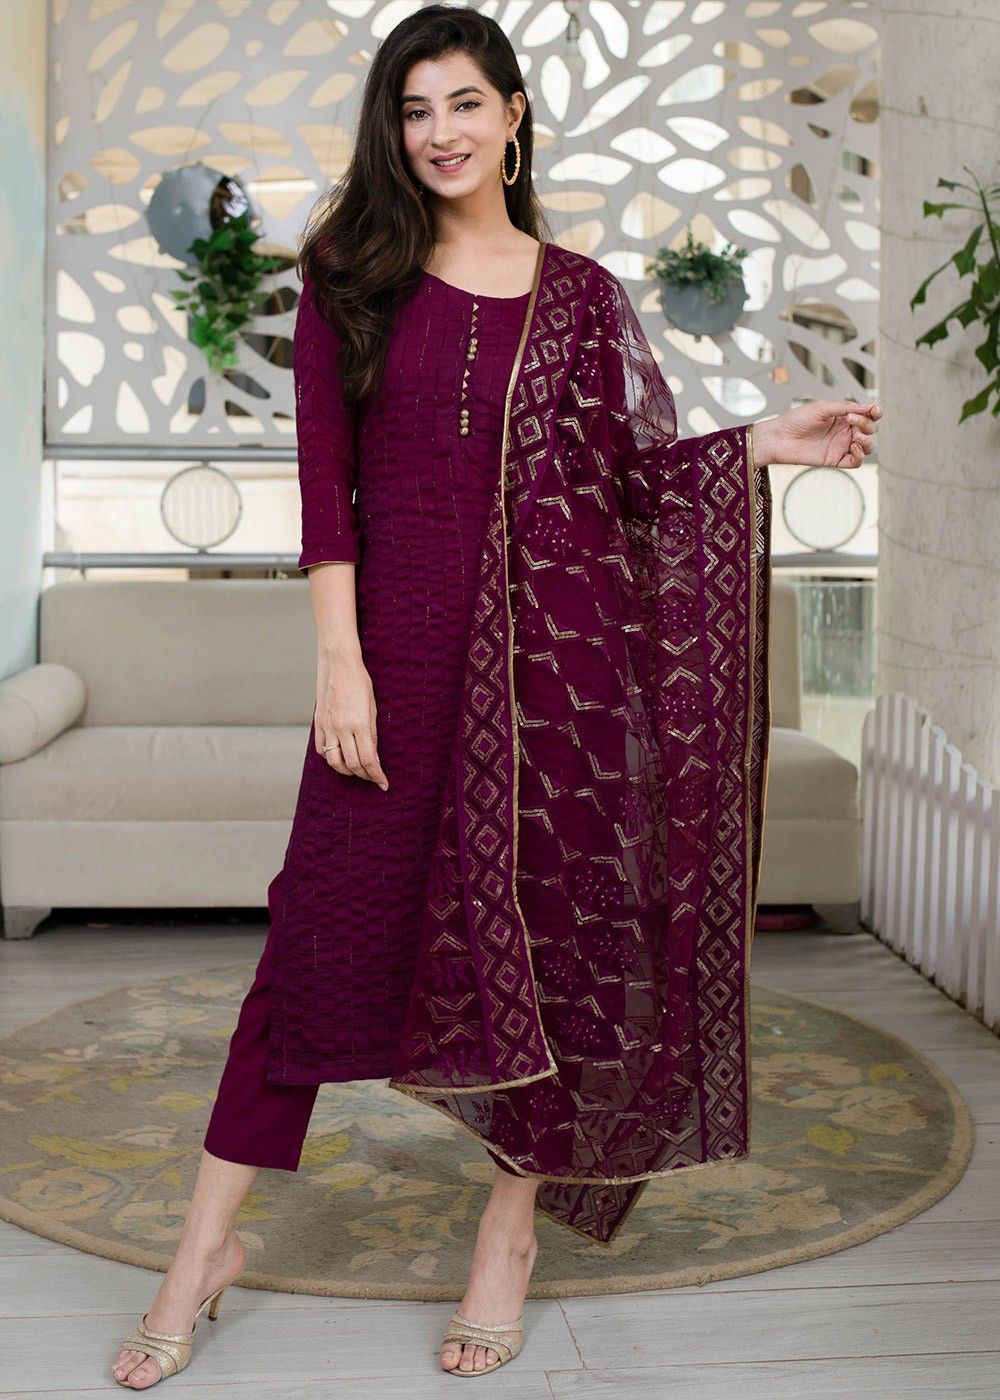 Readymade Magenta Pant Style Suit In Cotton 4135SL11